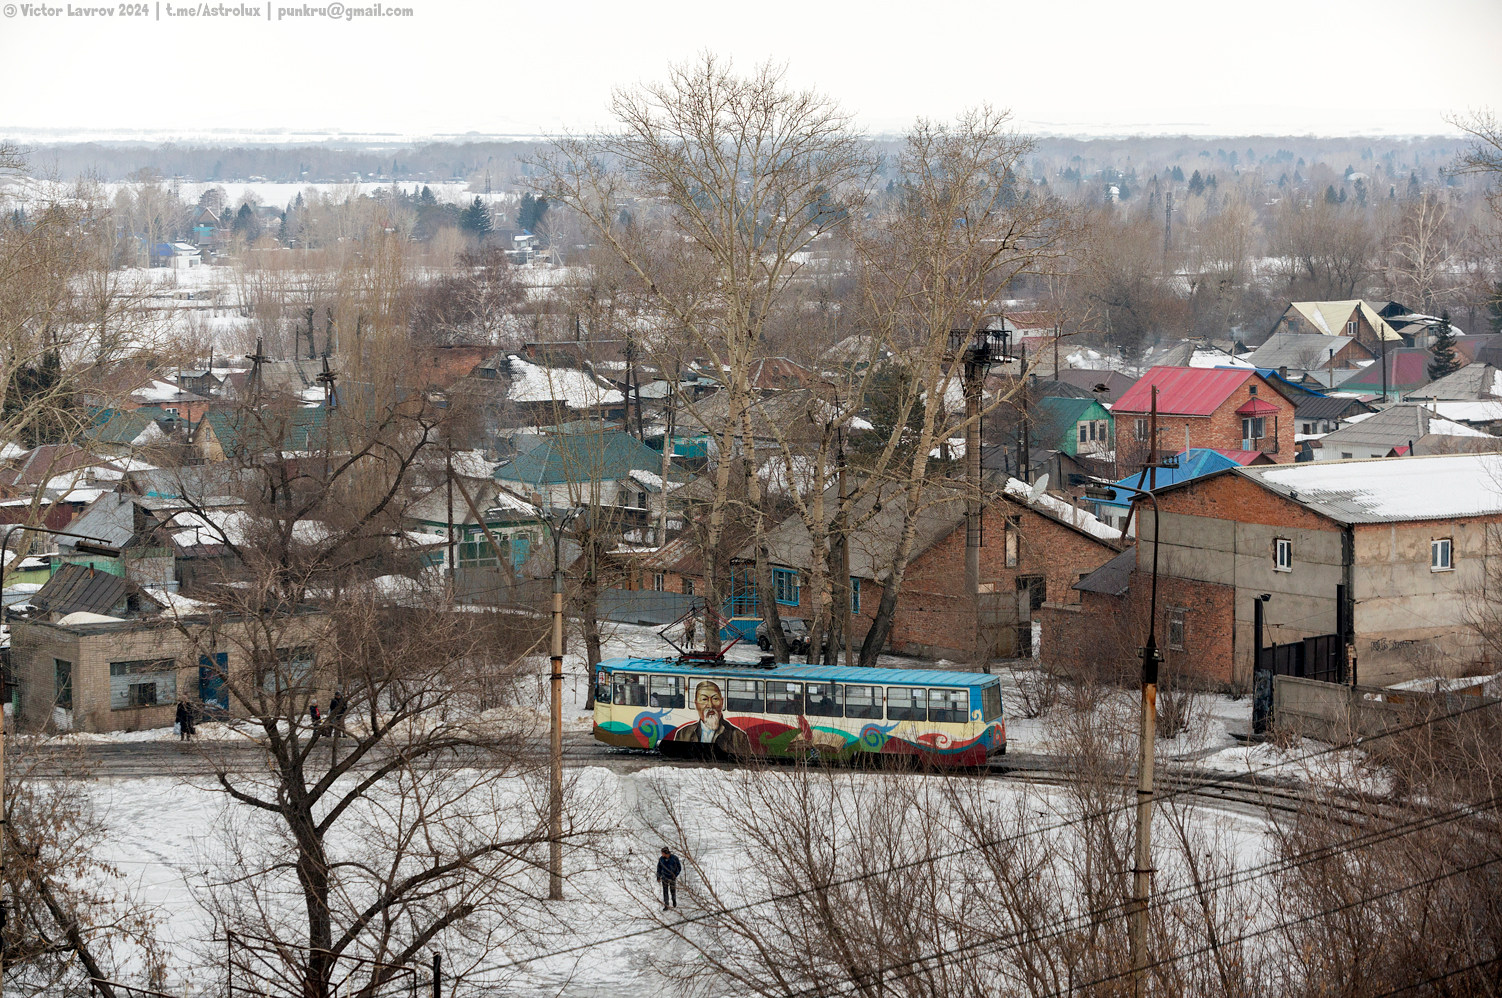 Ust-Kamenogorsk — Tramway lines and infrastructure